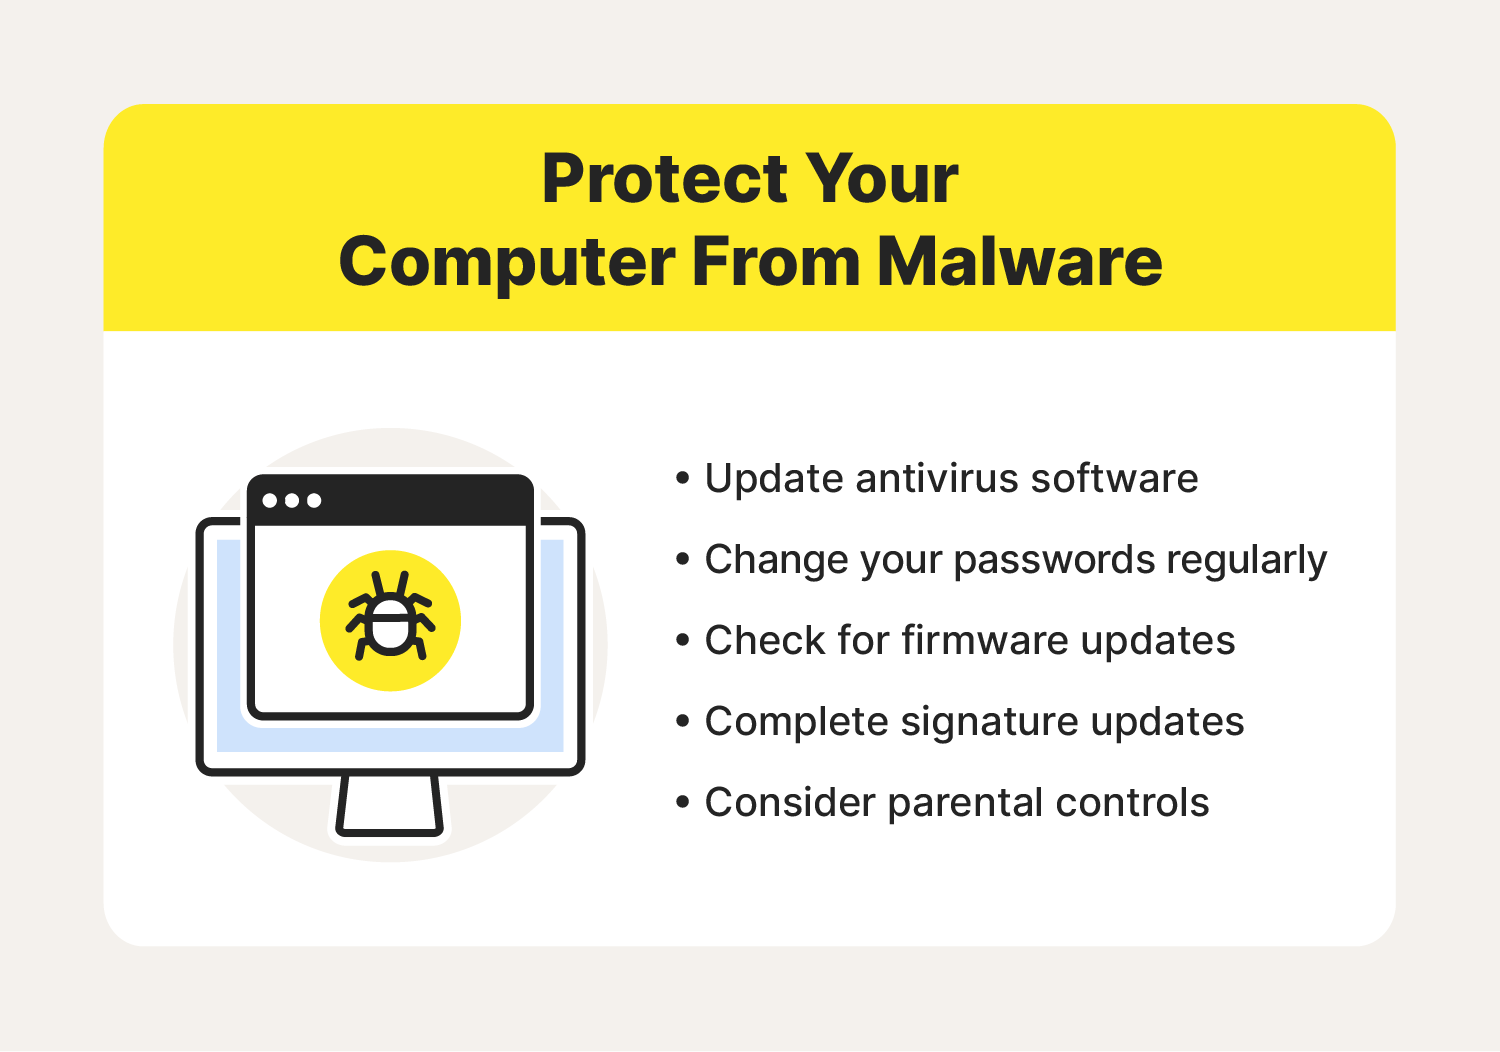 Protect your computer from malware